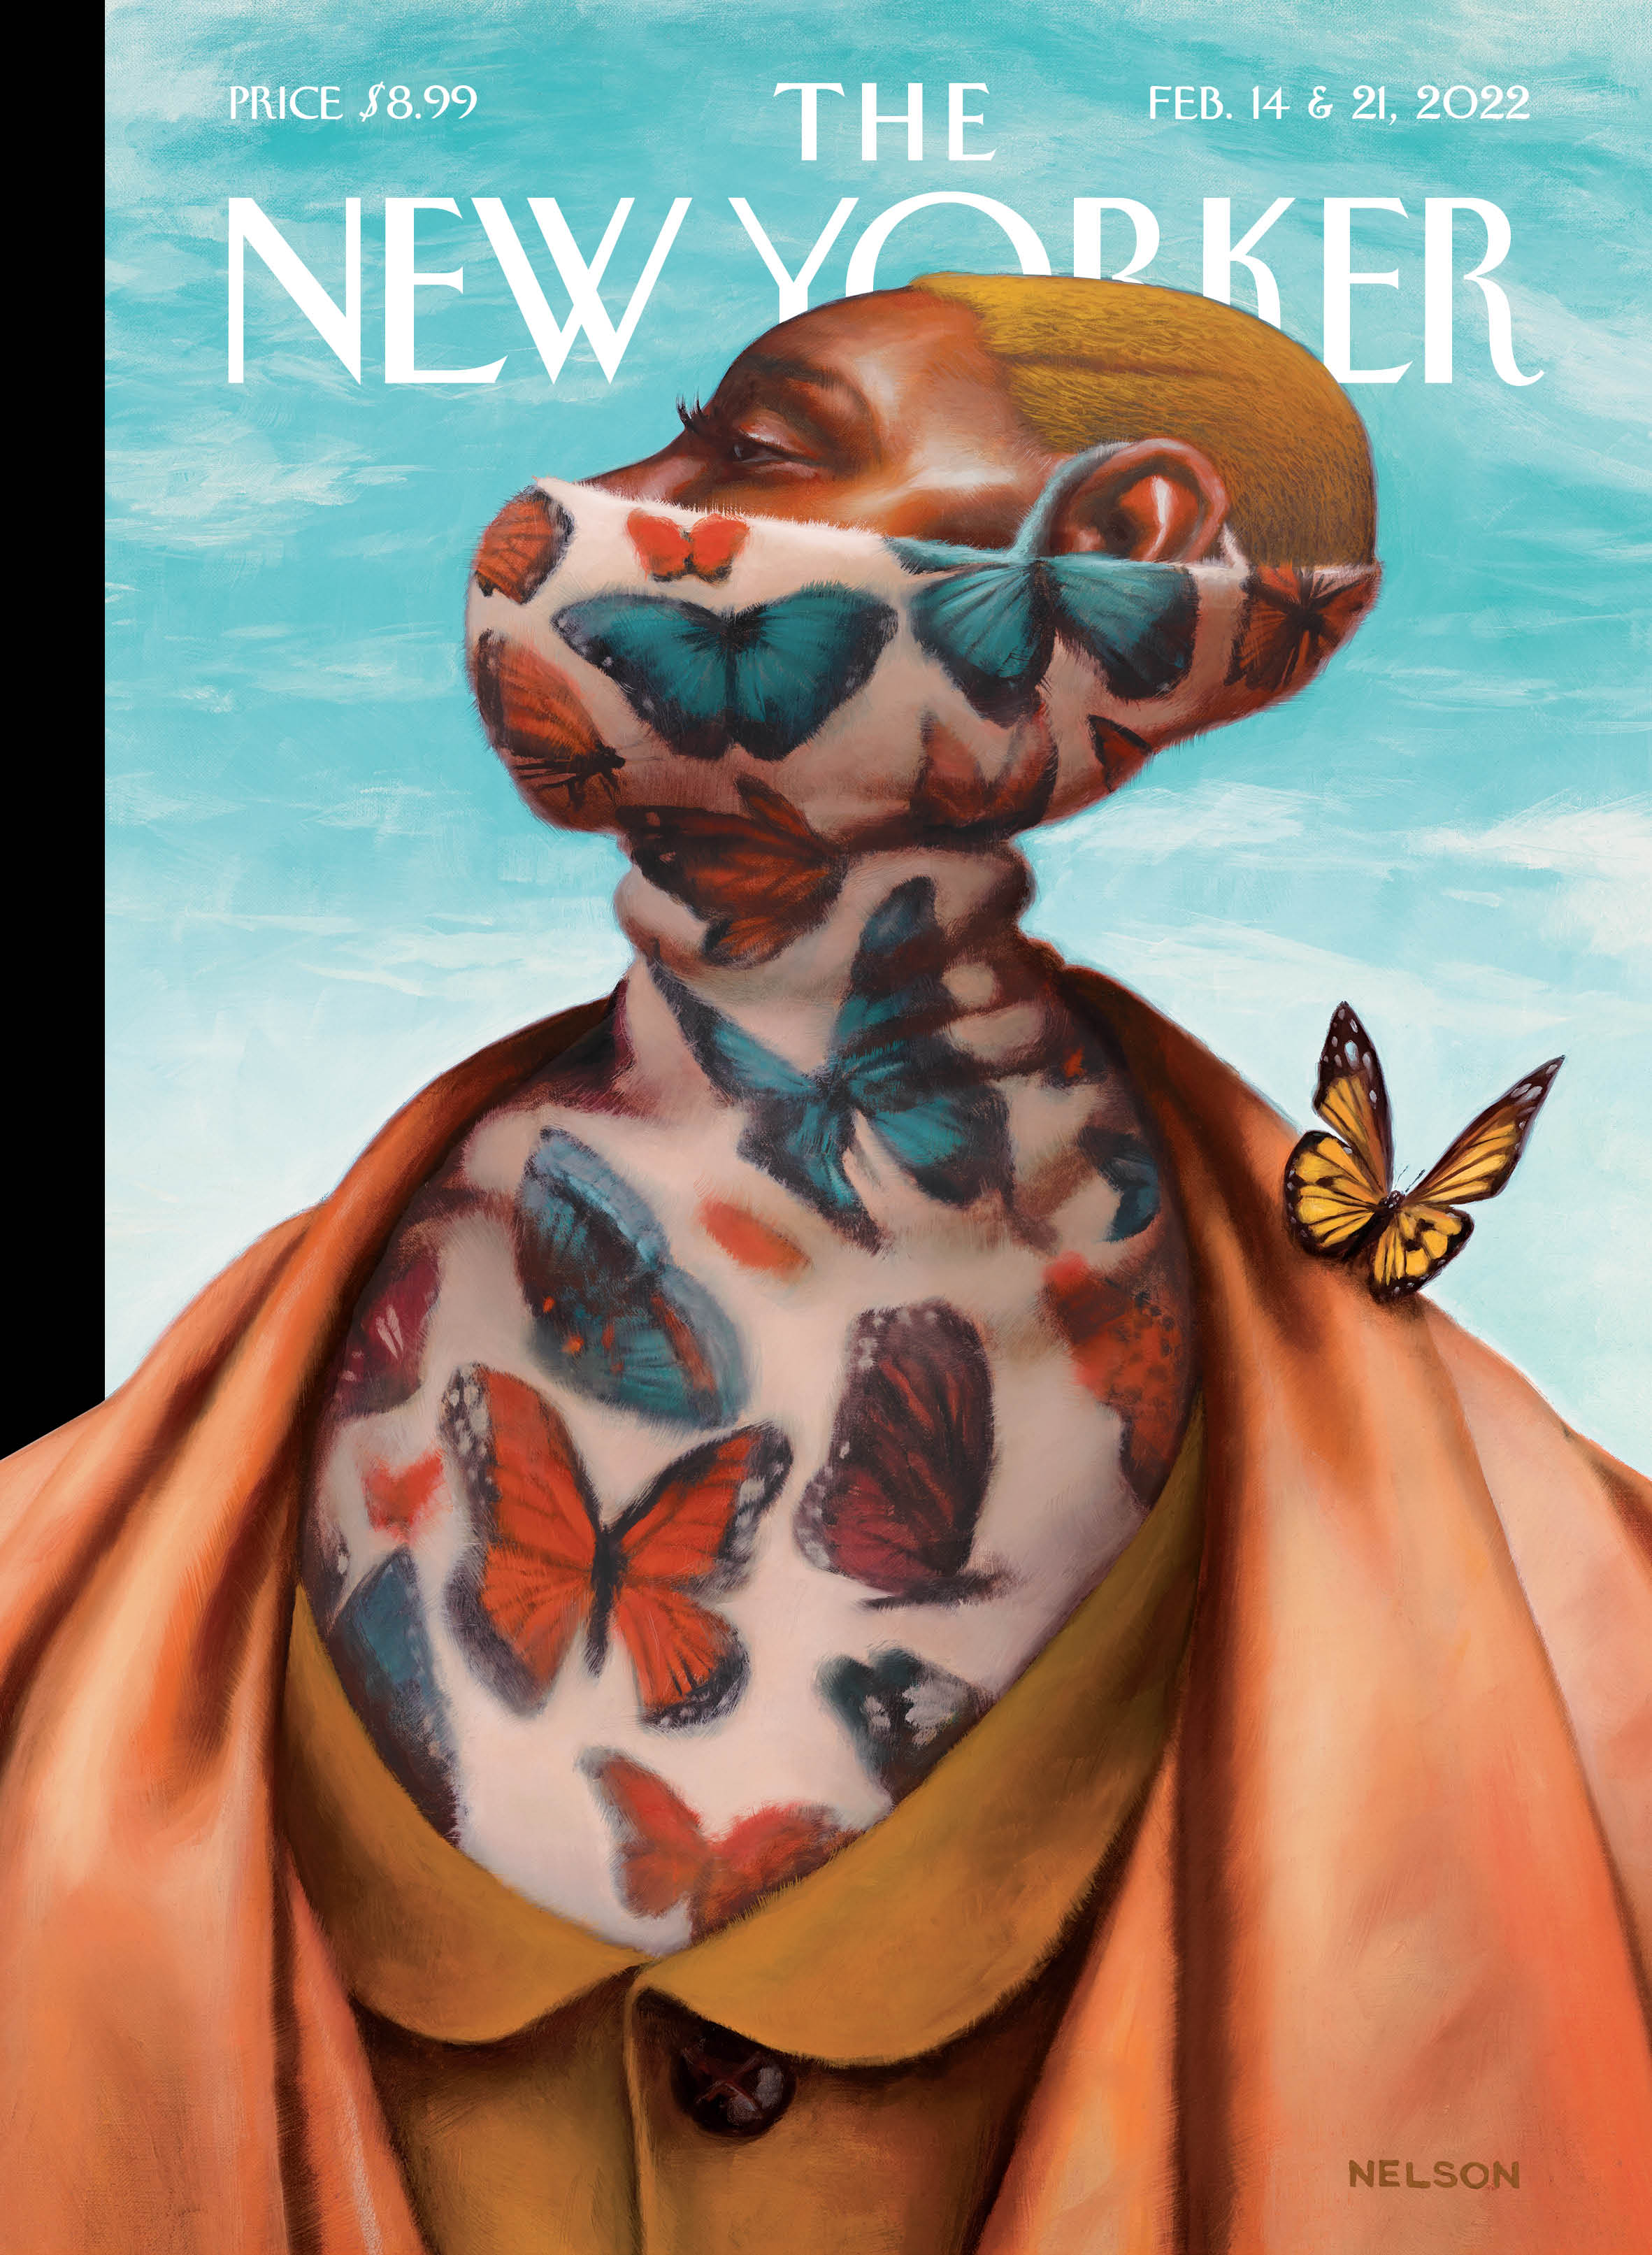 New Yorker - “High Style” February 14 and 21, 2022